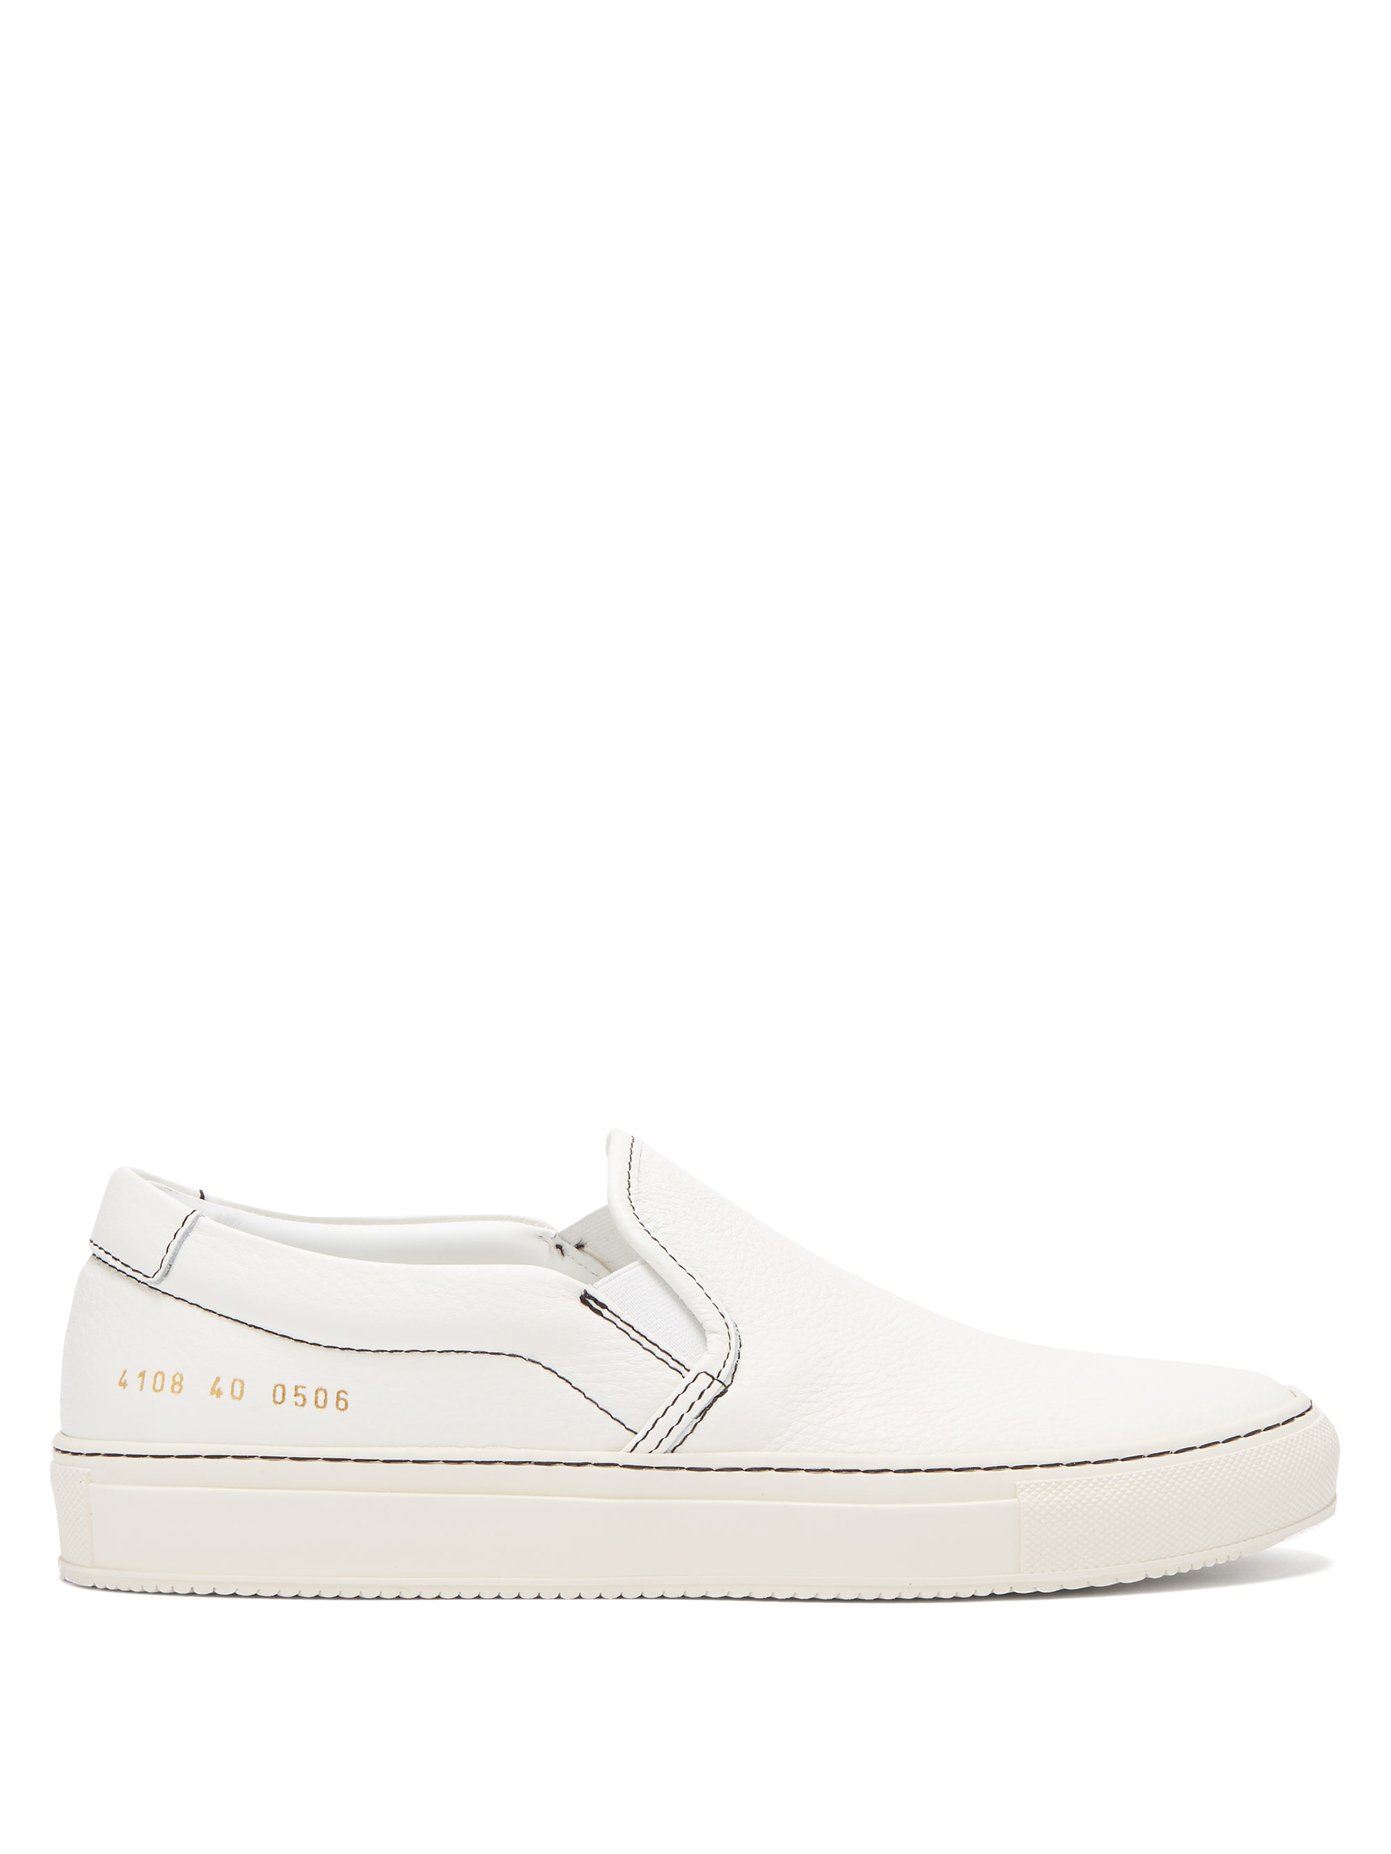 Leather slip-on trainers | Common 